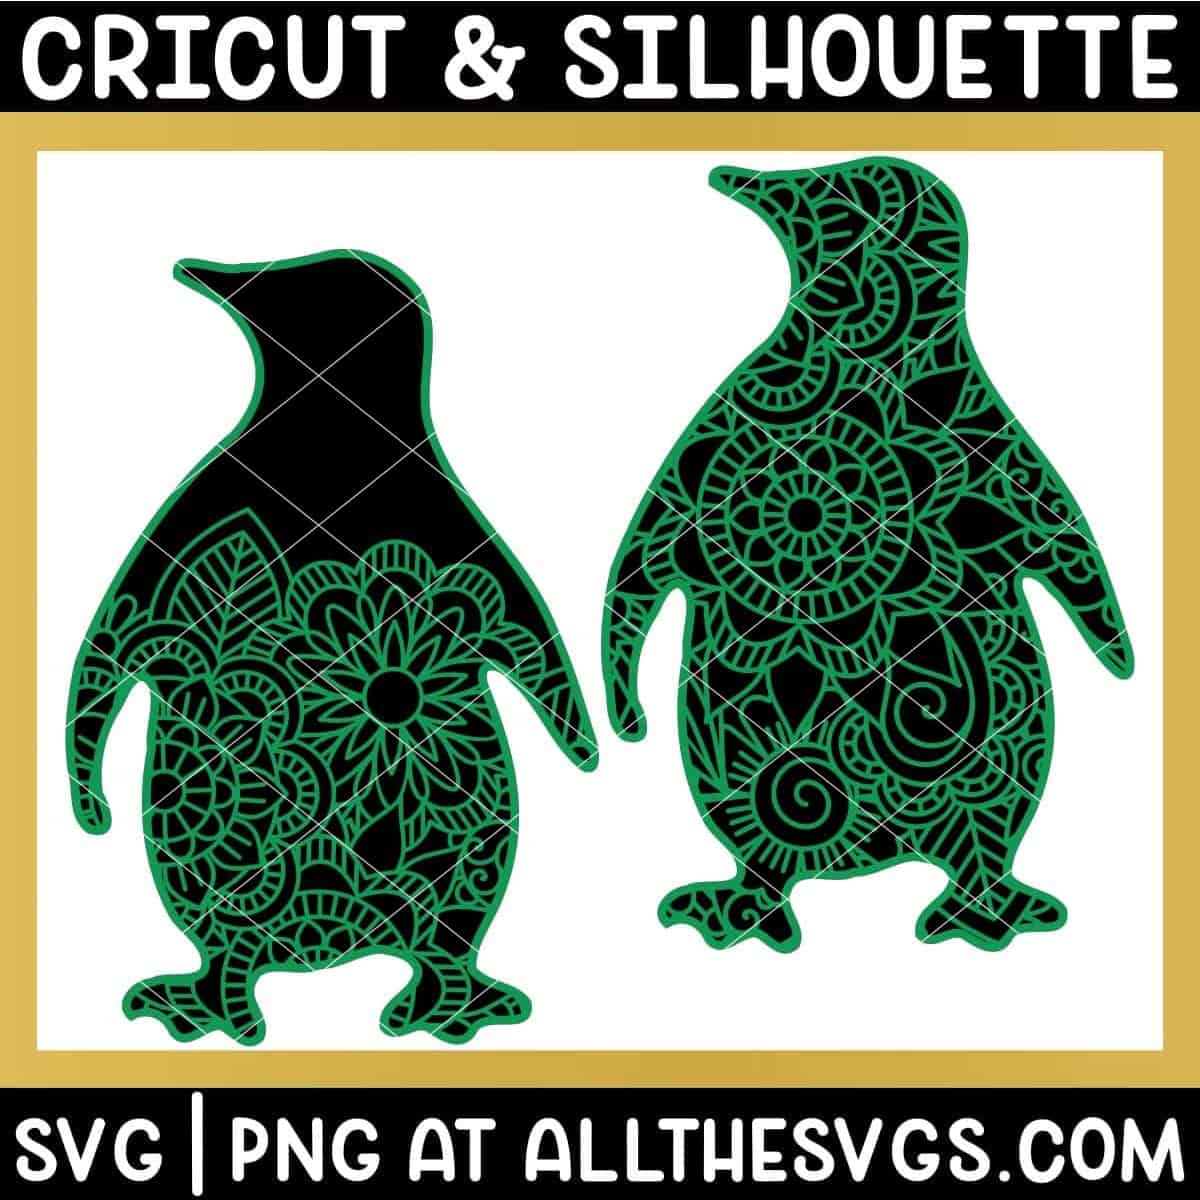 2 versions of penguin svg file mandala on full body and area below head.